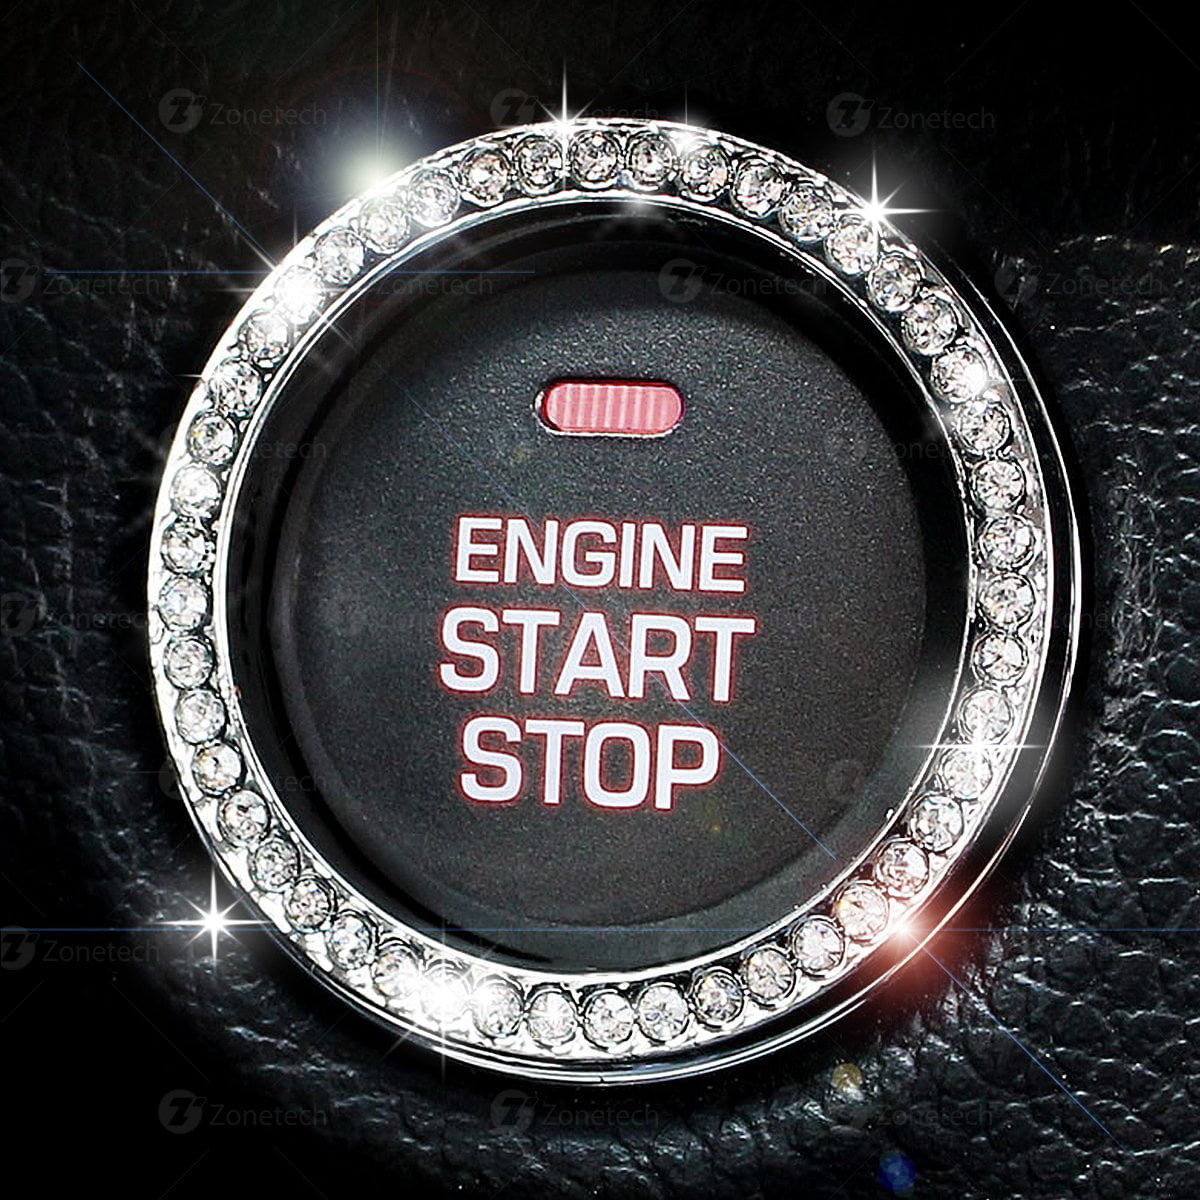 Replacement for Bentley 2Pcs Car Logo Engine Start Stop Ignition Push Button Emblem Sticker,Bling Crystal Rhinestone Cover Protector Ring Exquisite Decoration Gift 